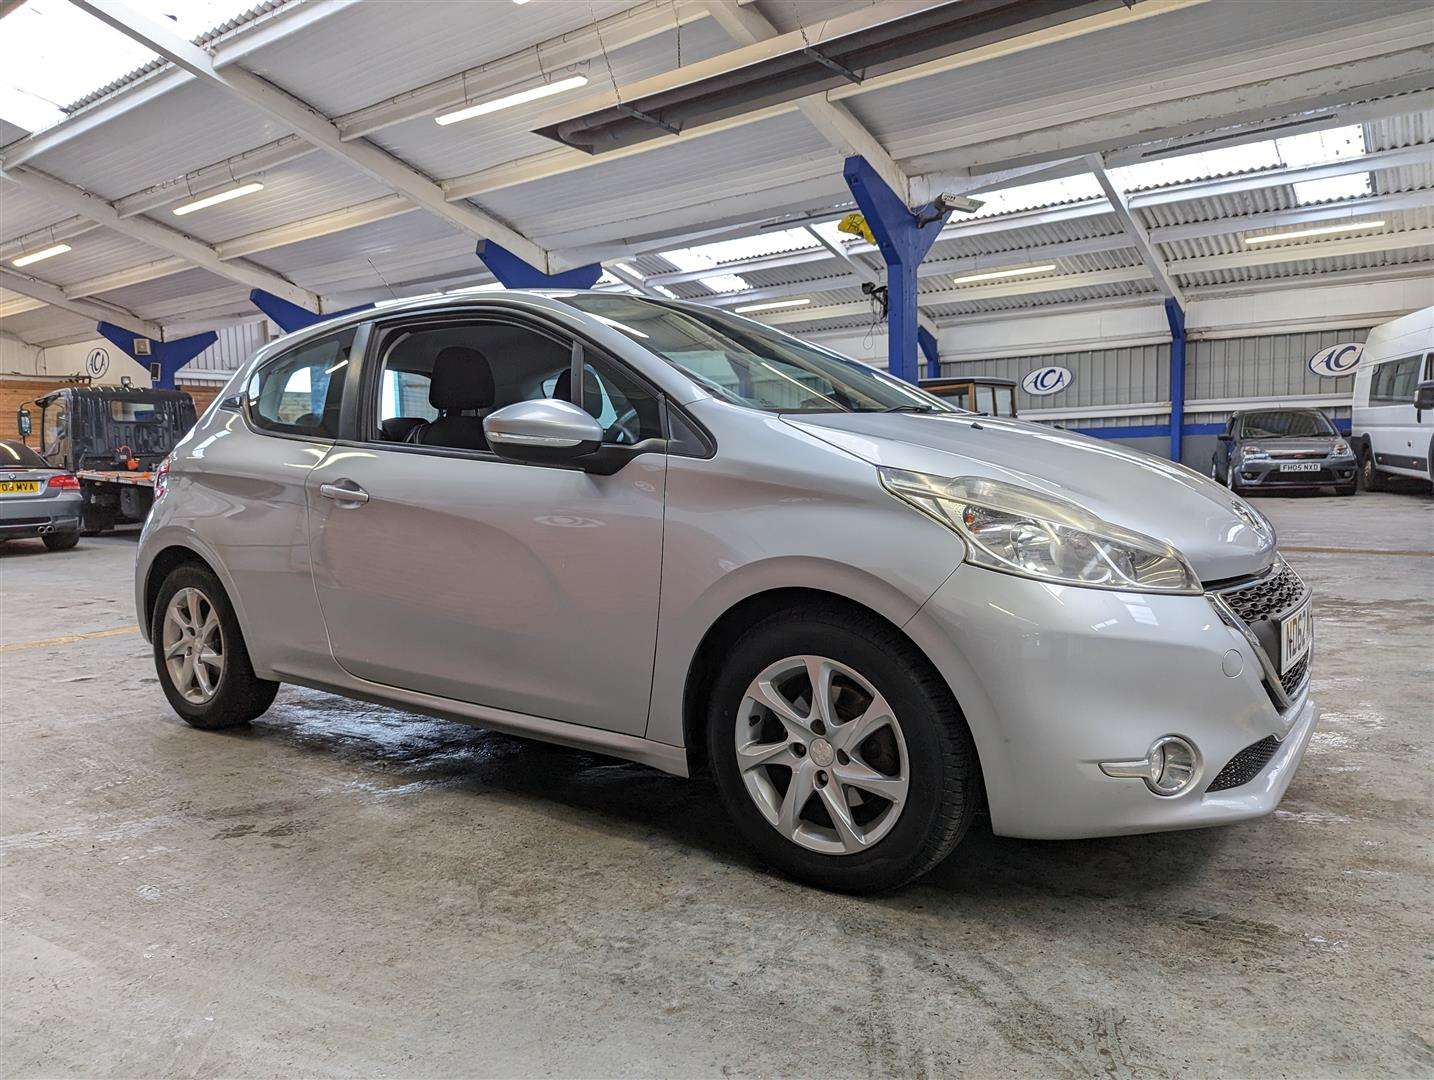 2012 PEUGEOT 208 ACTIVE E-HDI - Image 10 of 24